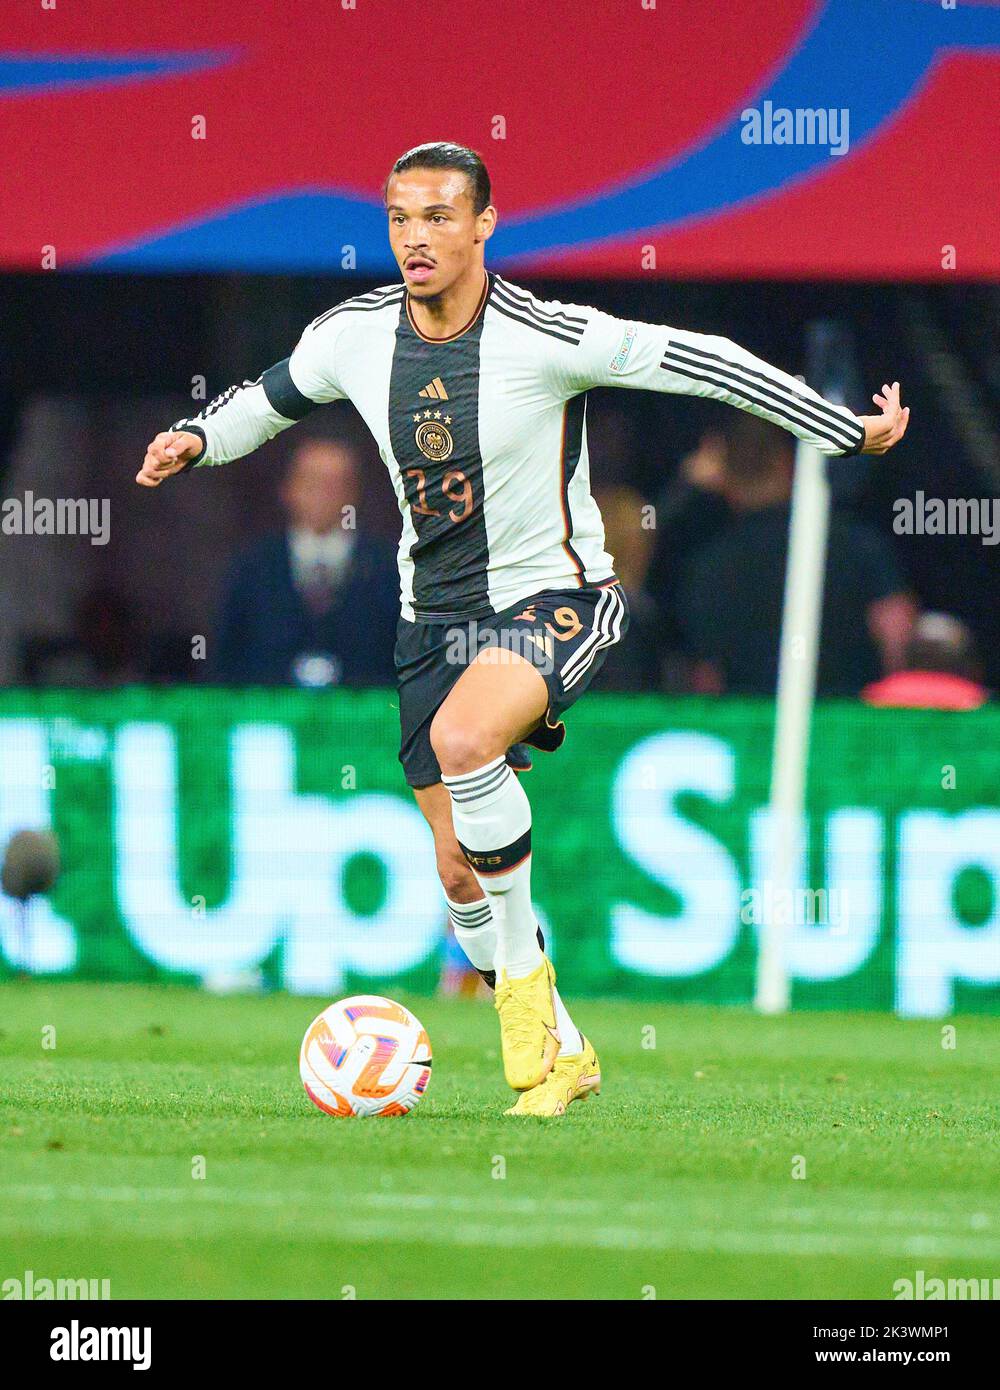 Leroy SANE, DFB 19  in the UEFA Nations League 2022 match  ENGLAND - GERMANY 3-3  in Season 2022/2023 on Sept 26, 2022  in London, Great Britain.  © Peter Schatz / Alamy Live News Stock Photo